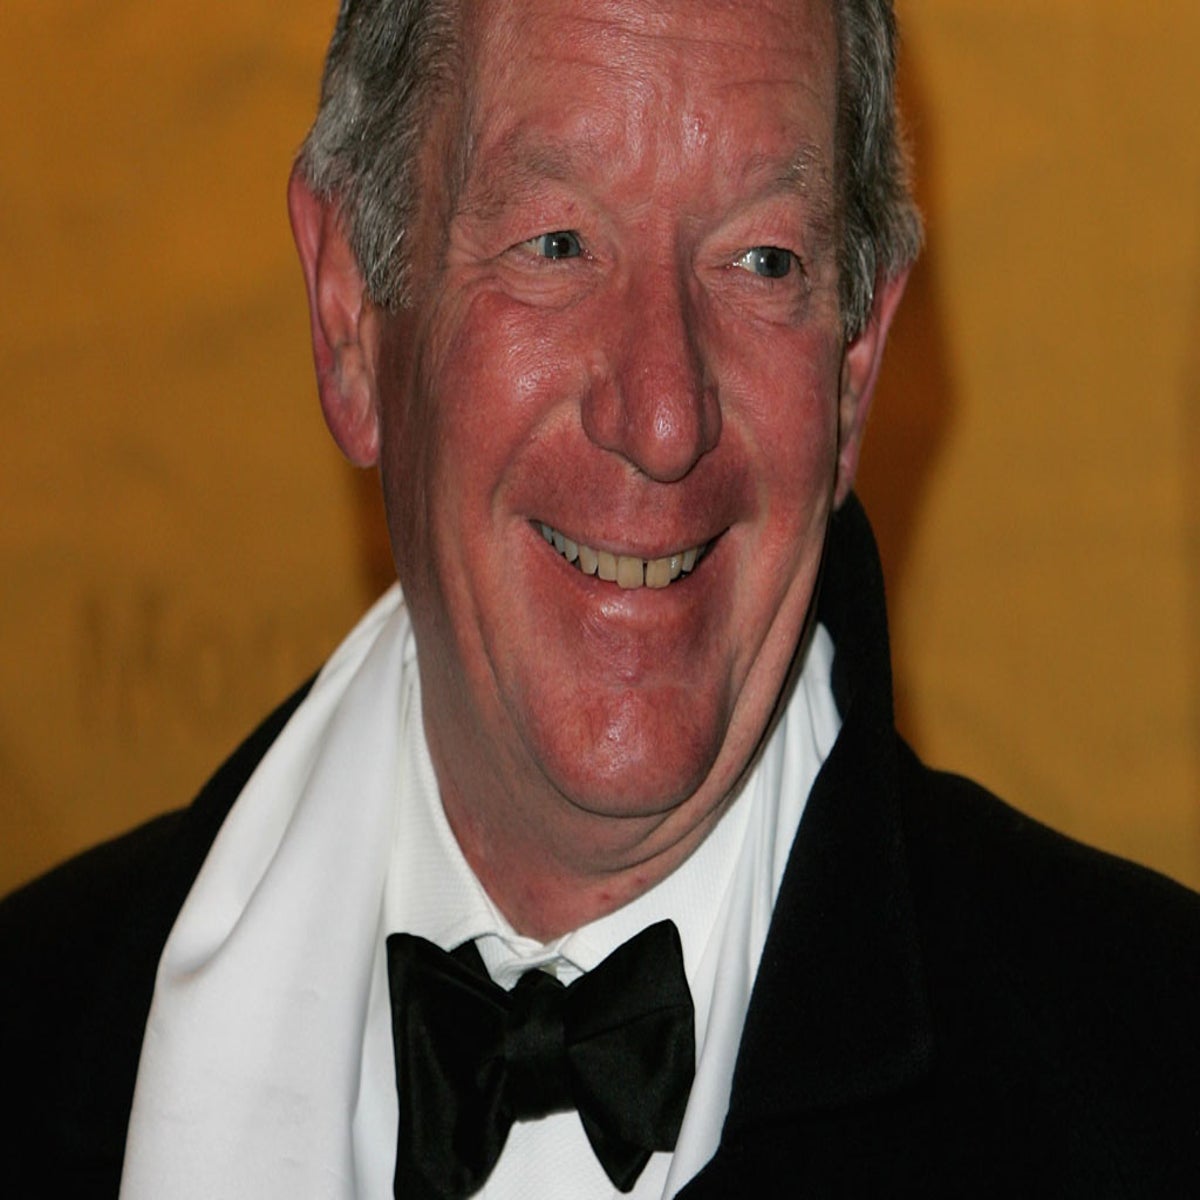 Michael Buerk: 'At 70, I love the fact that people still want me to work  for them